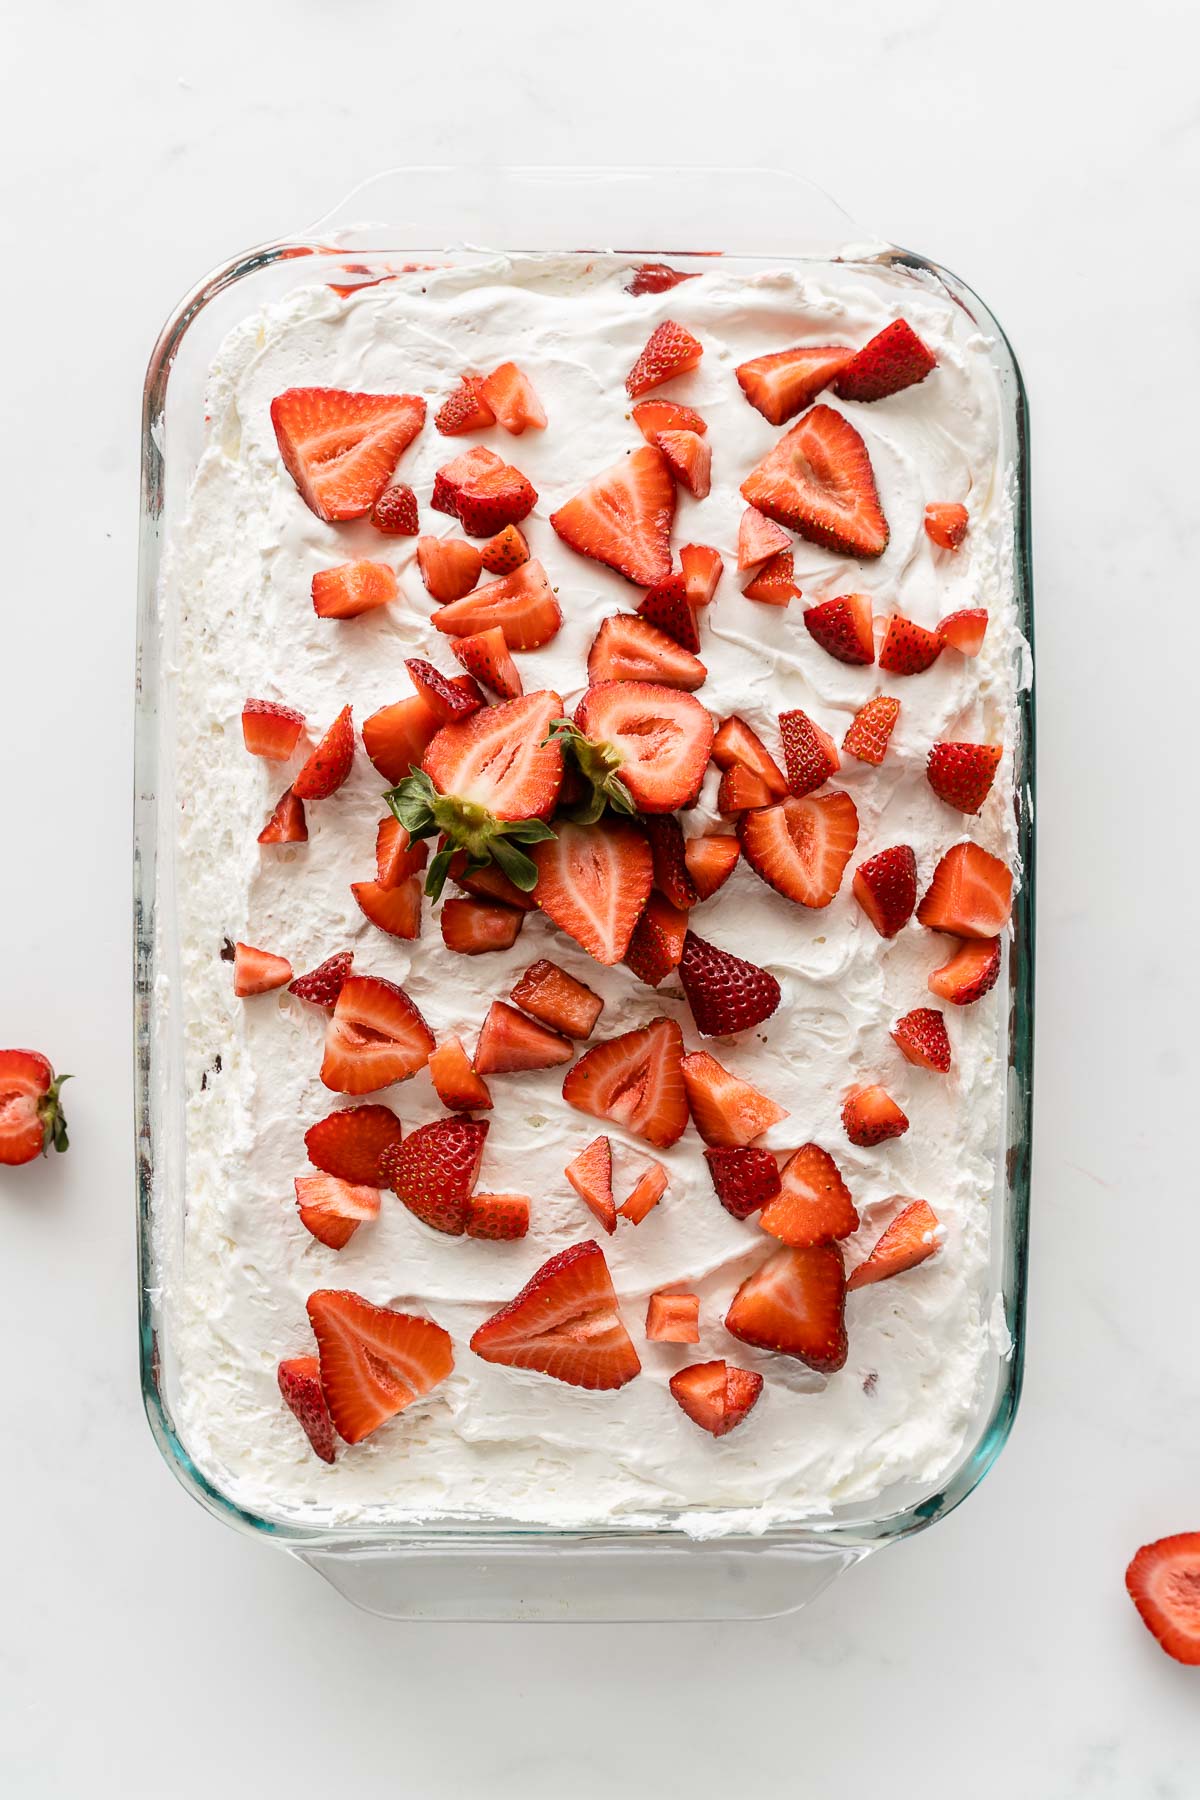 strawberry poke cake topped with whipped cream and fresh strawberry slices in a 9x13 glass baking dish